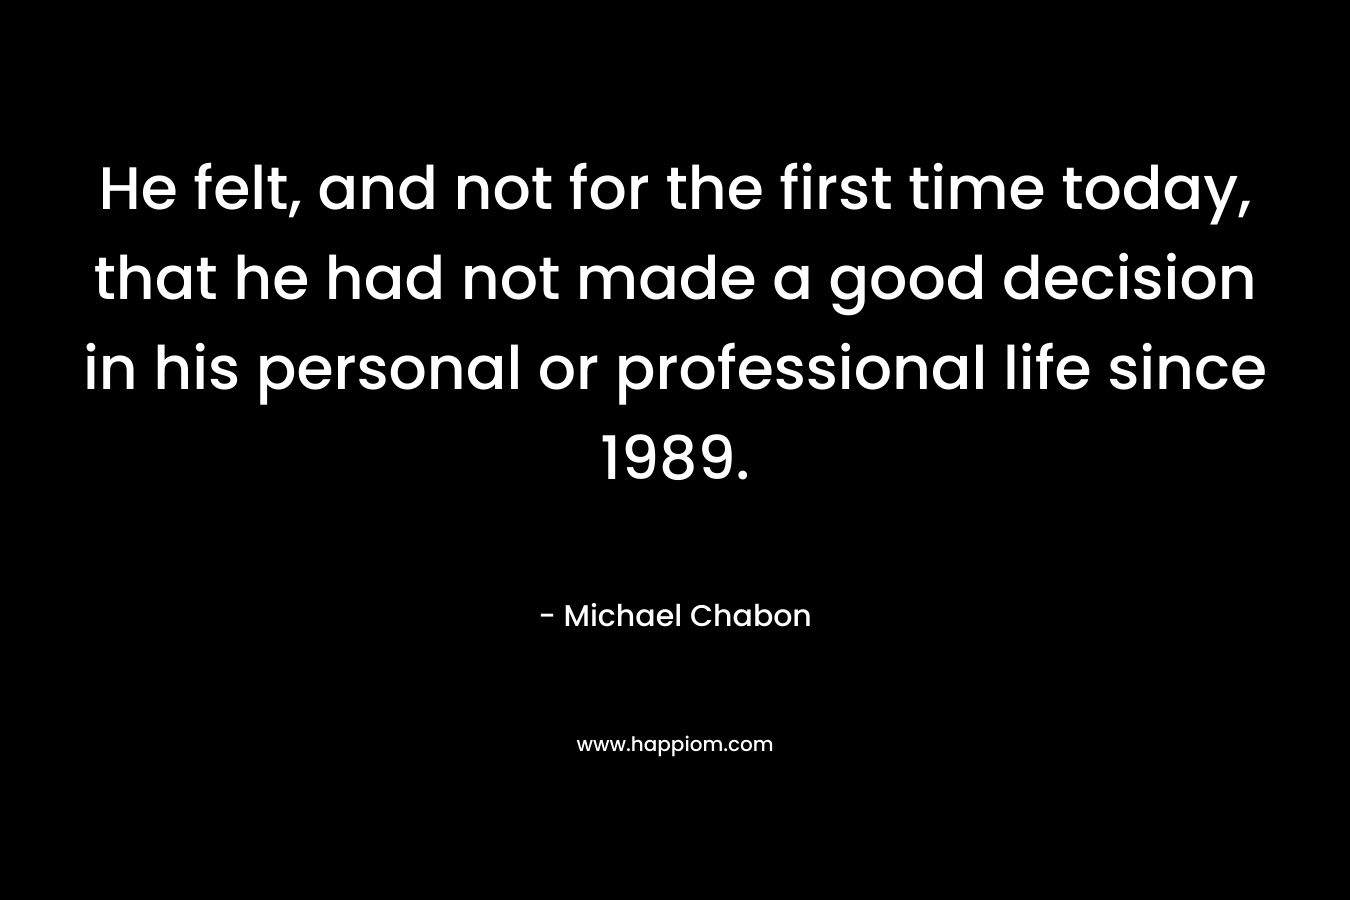 He felt, and not for the first time today, that he had not made a good decision in his personal or professional life since 1989. – Michael Chabon